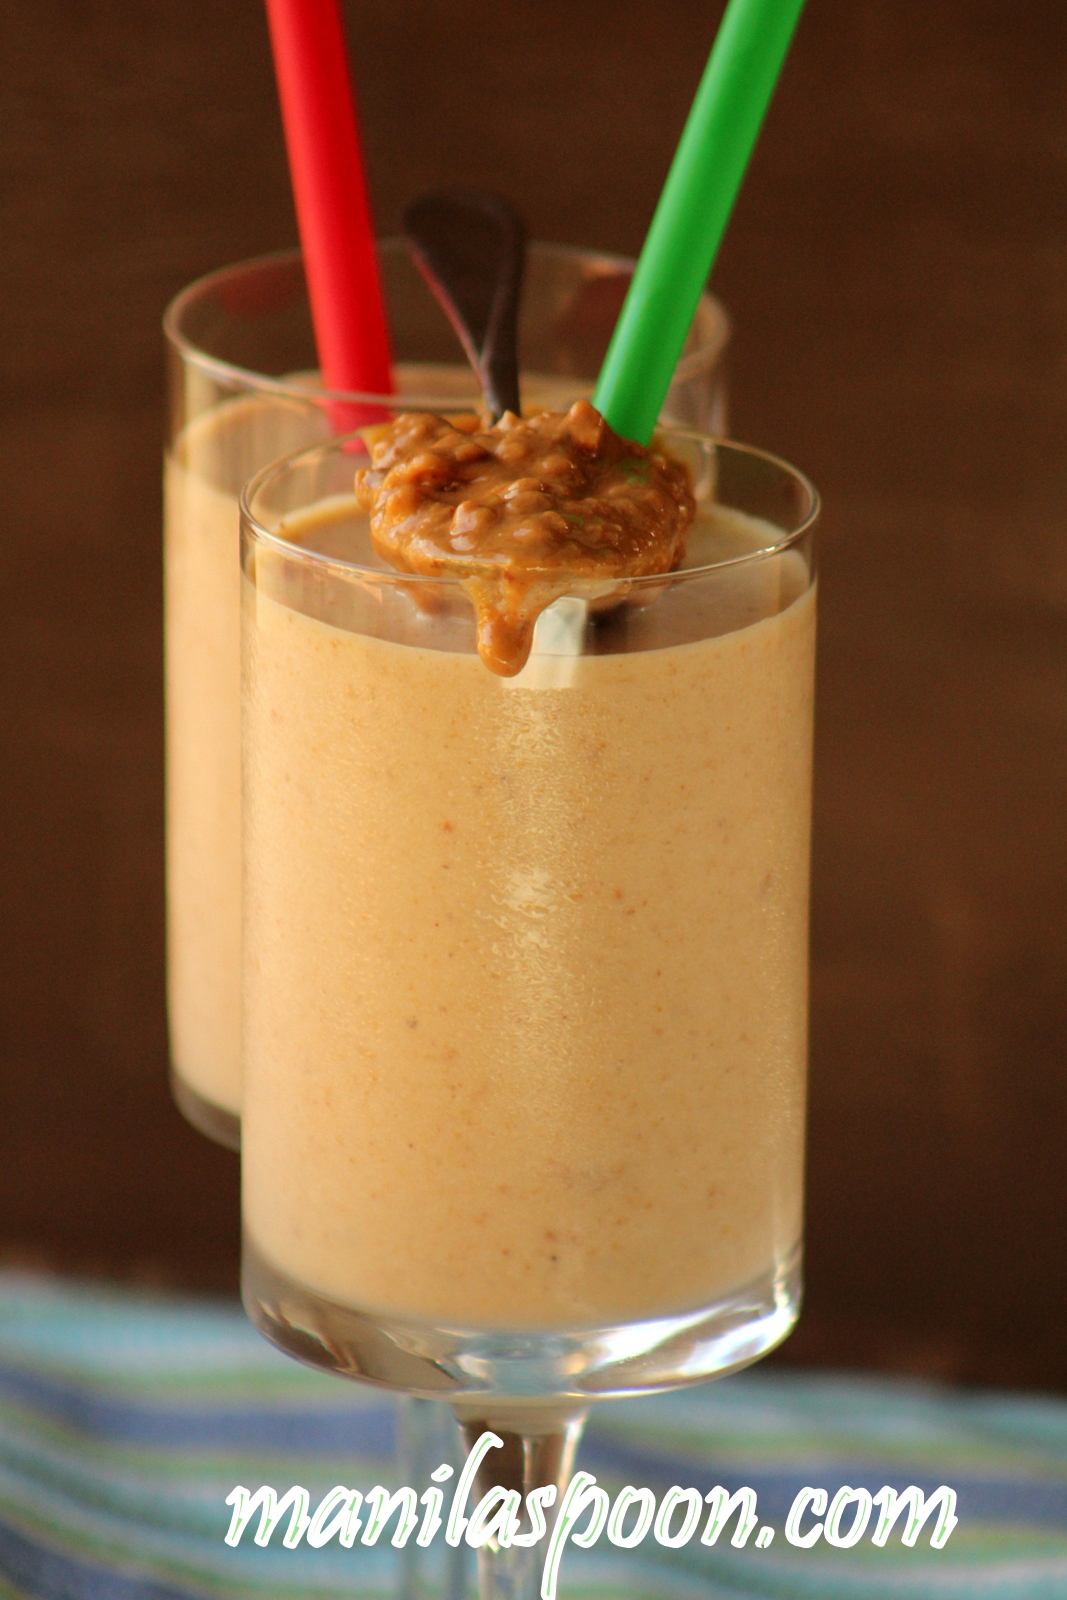 Peanut Butter and Banana Smoothie